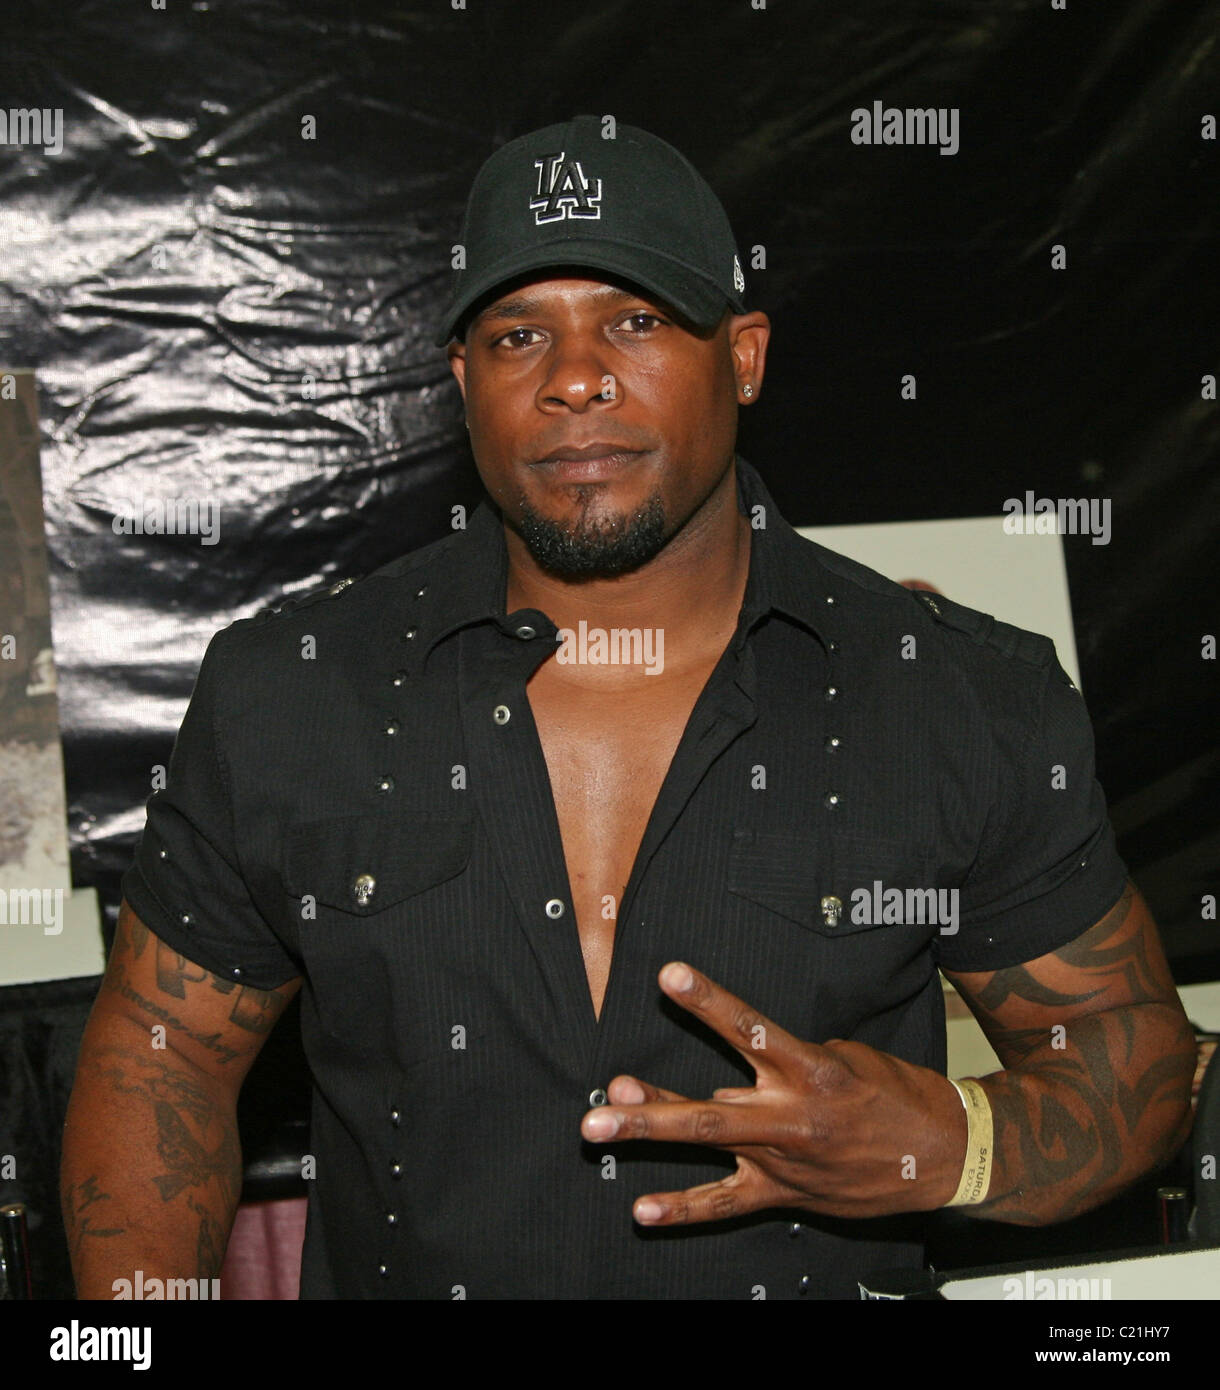 film actor Mr. Marcus Attends EXXXOTICA Expo 2009 held at the New Jersey Ex...